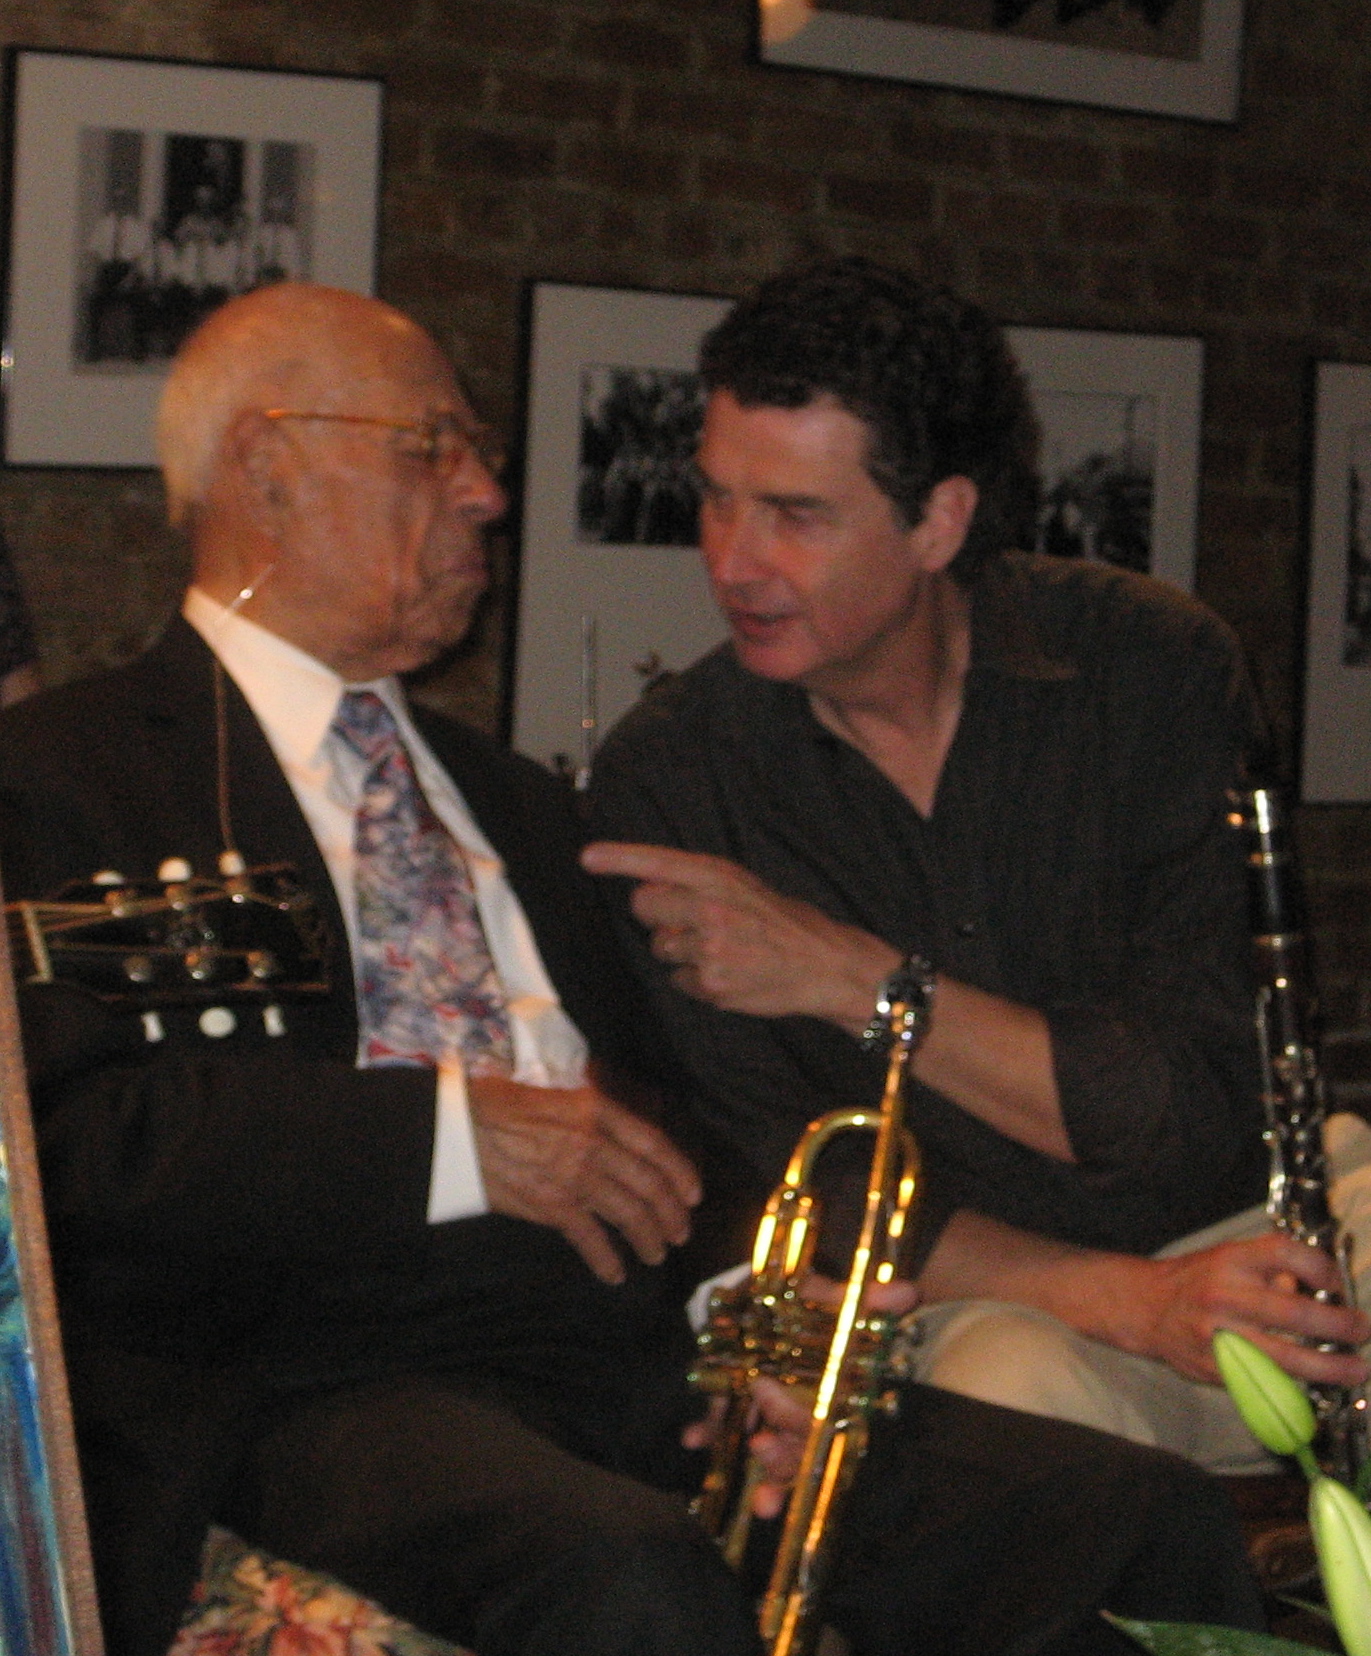 two older gentlemen sharing a conversation as they play instruments